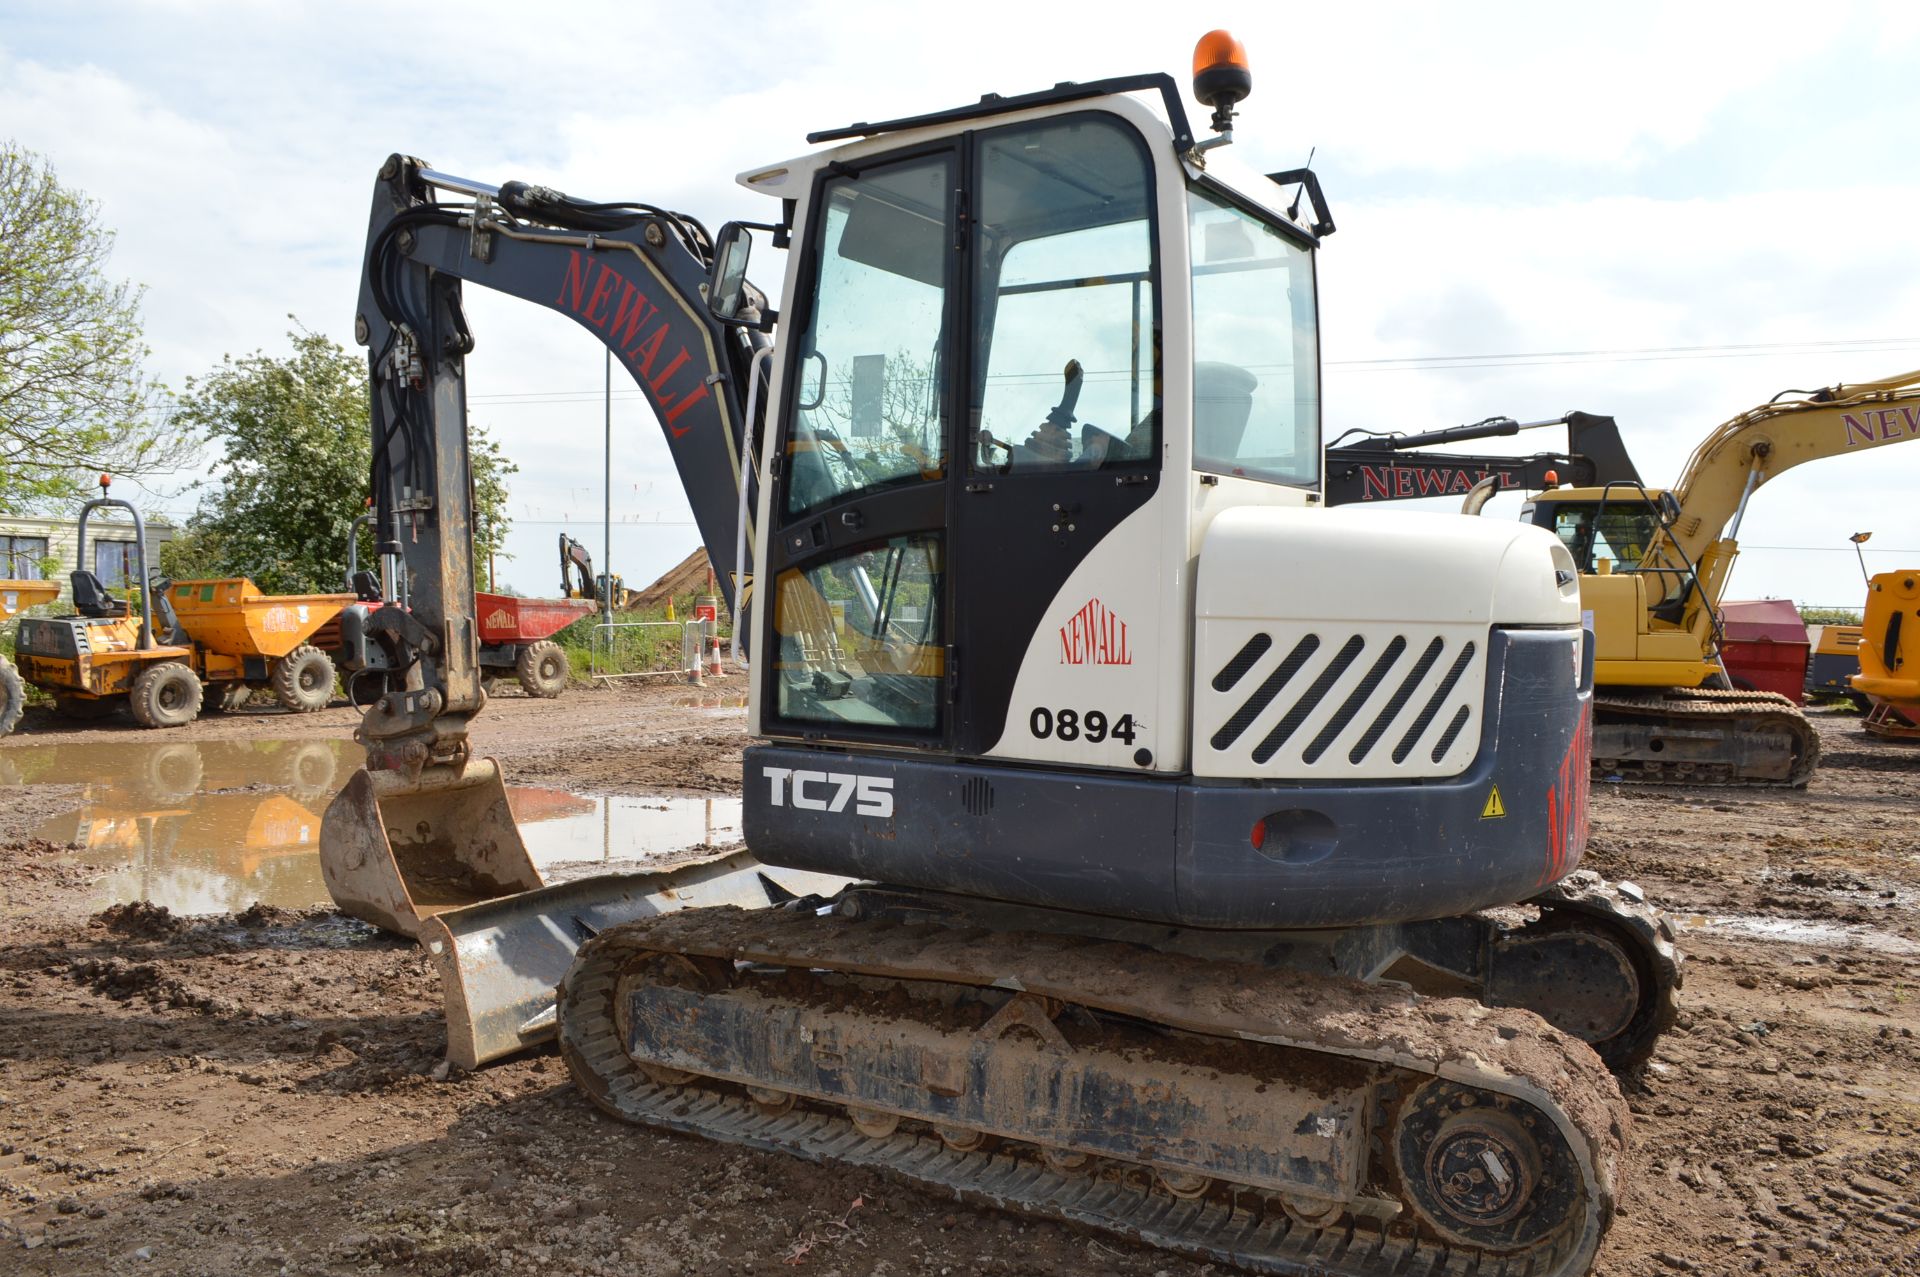 Terex 7.5t Rubber Tracked Excavator with Blade, Qu - Image 8 of 32